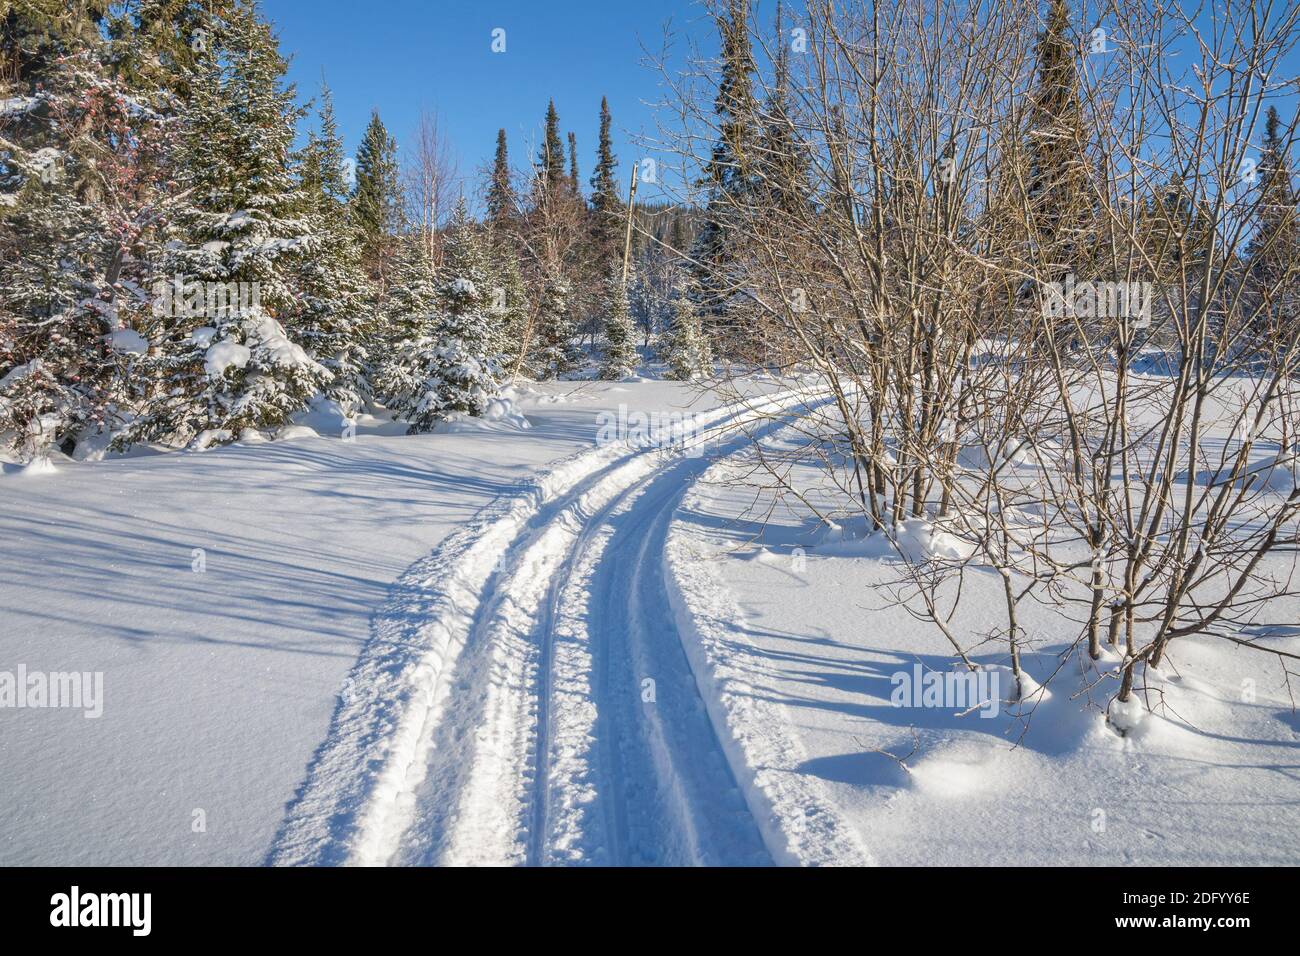 The deep trail of the snow scooter in the snow leads to the snow-covered trees in the winter forest. Stock Photo